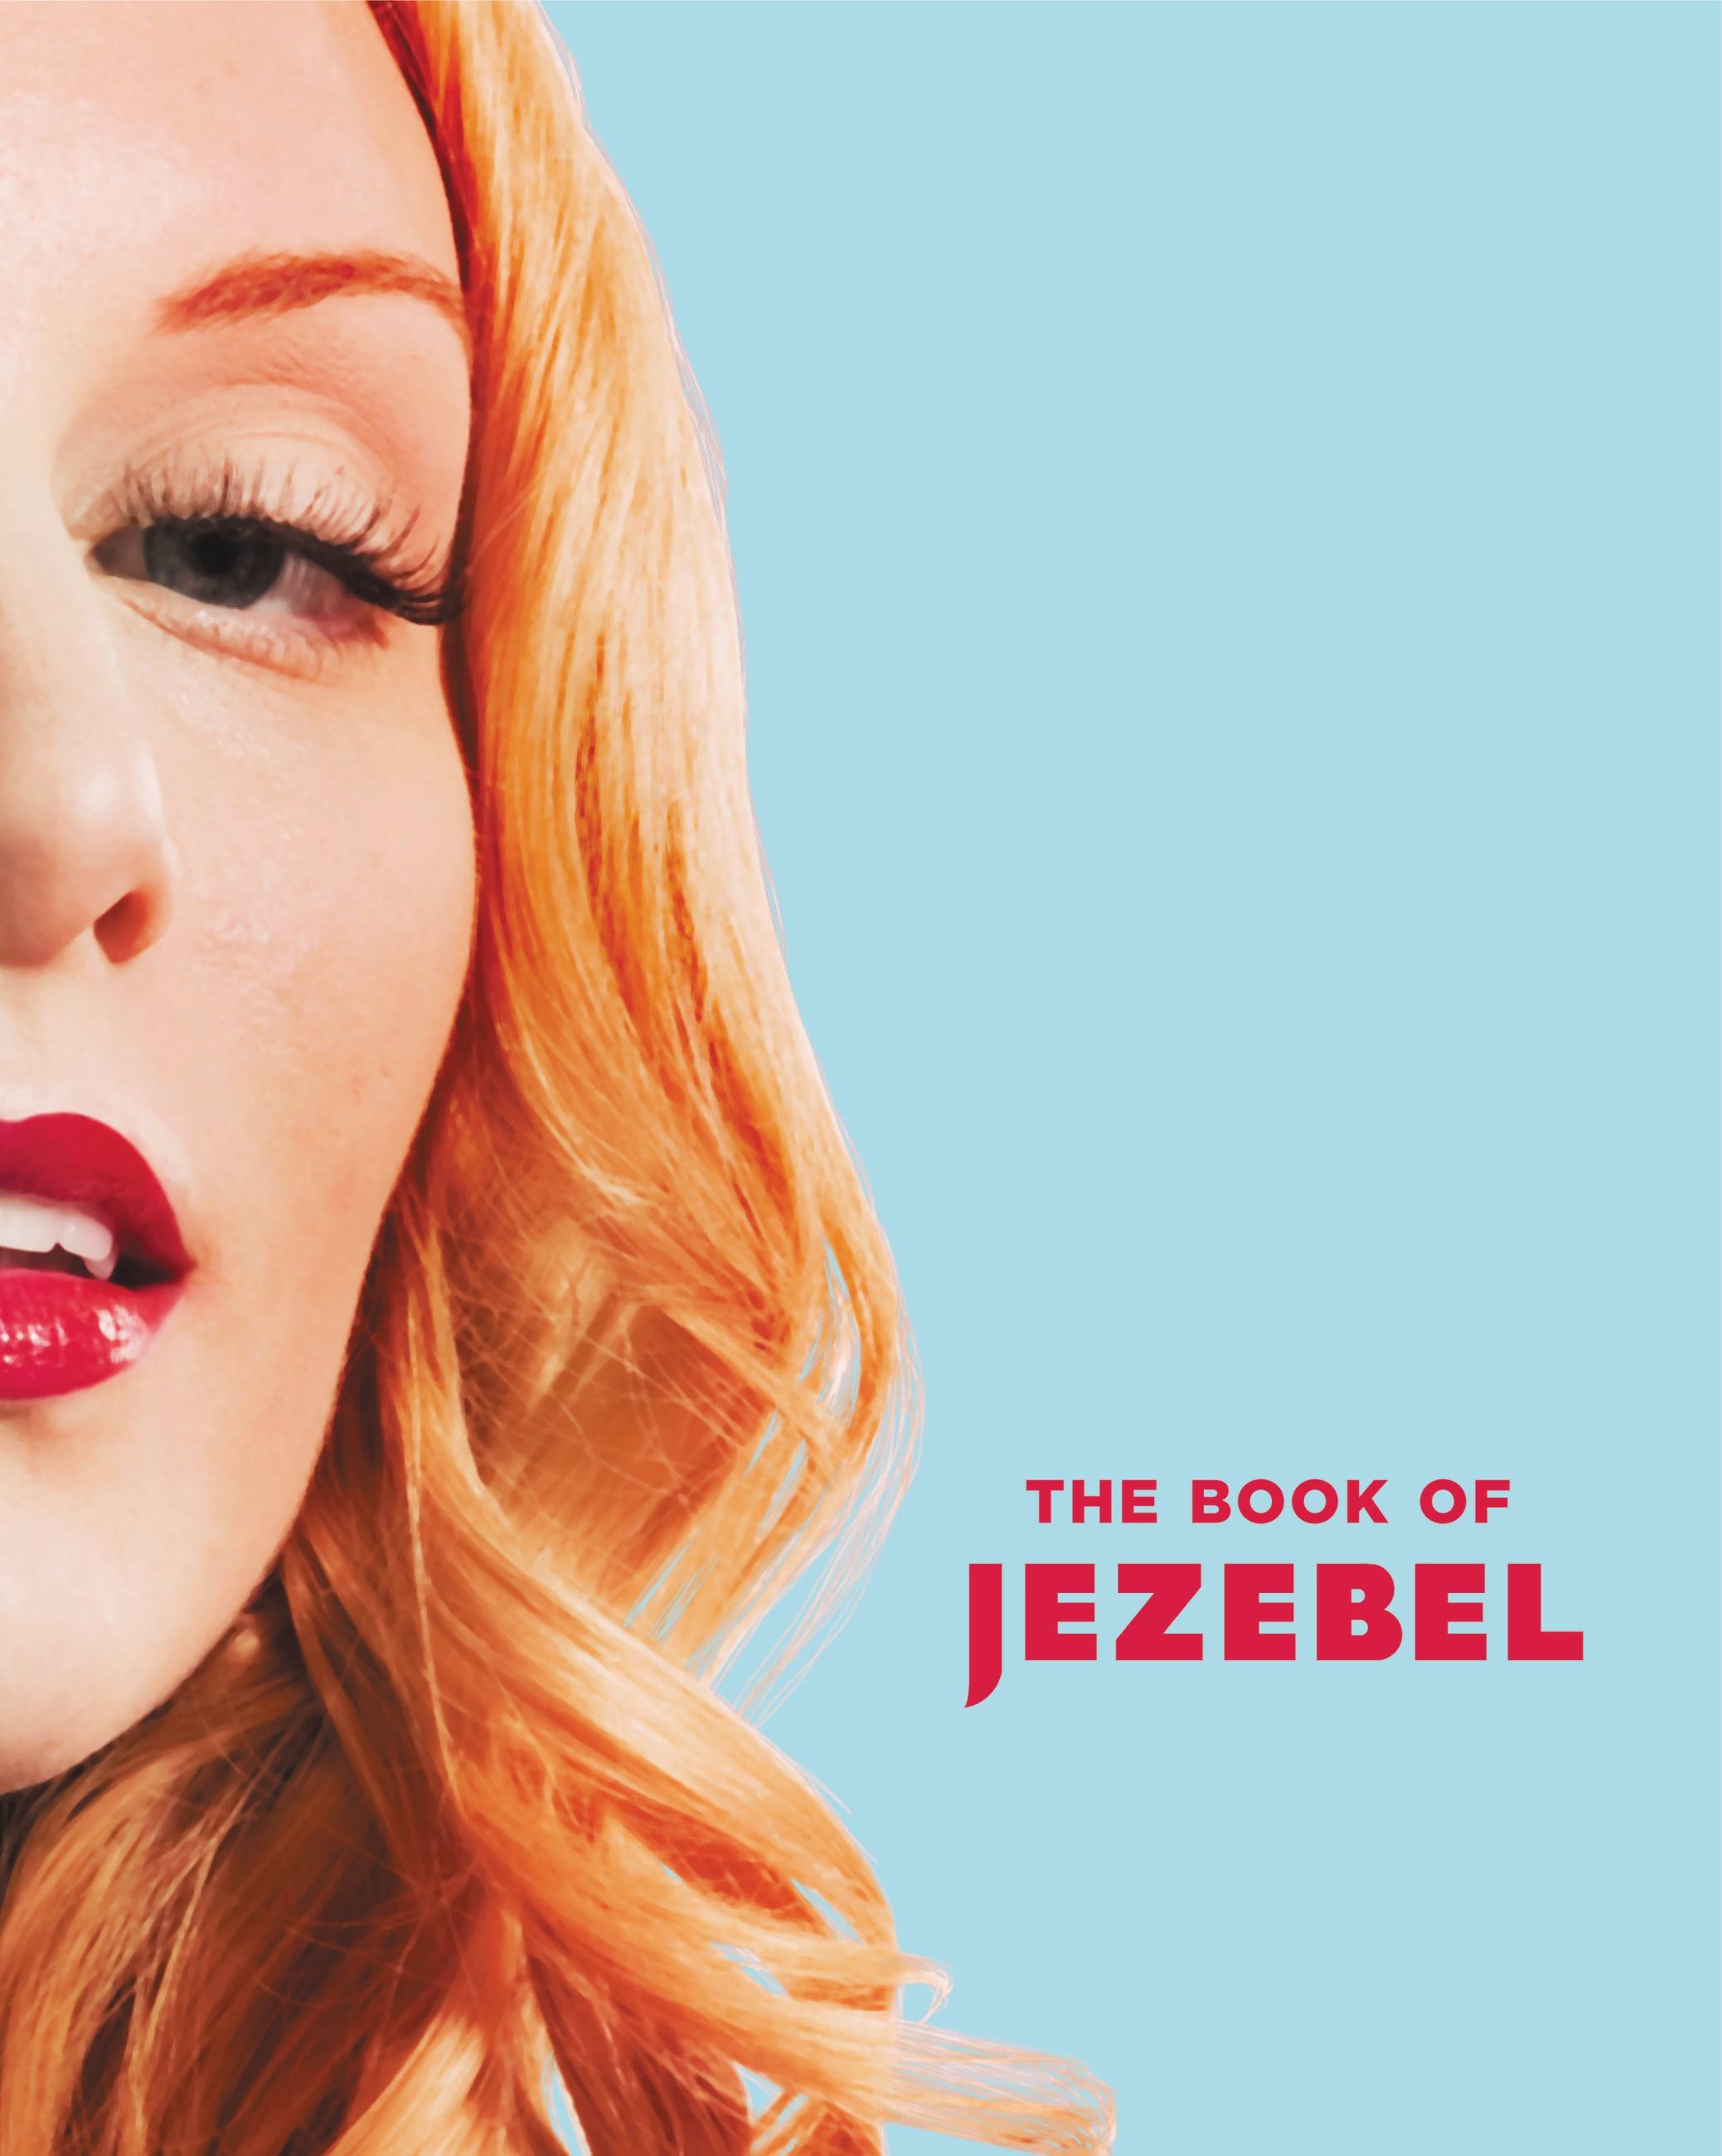 Perky Teen Breasts - The Book of Jezebel by Anna Holmes | Hachette Book Group